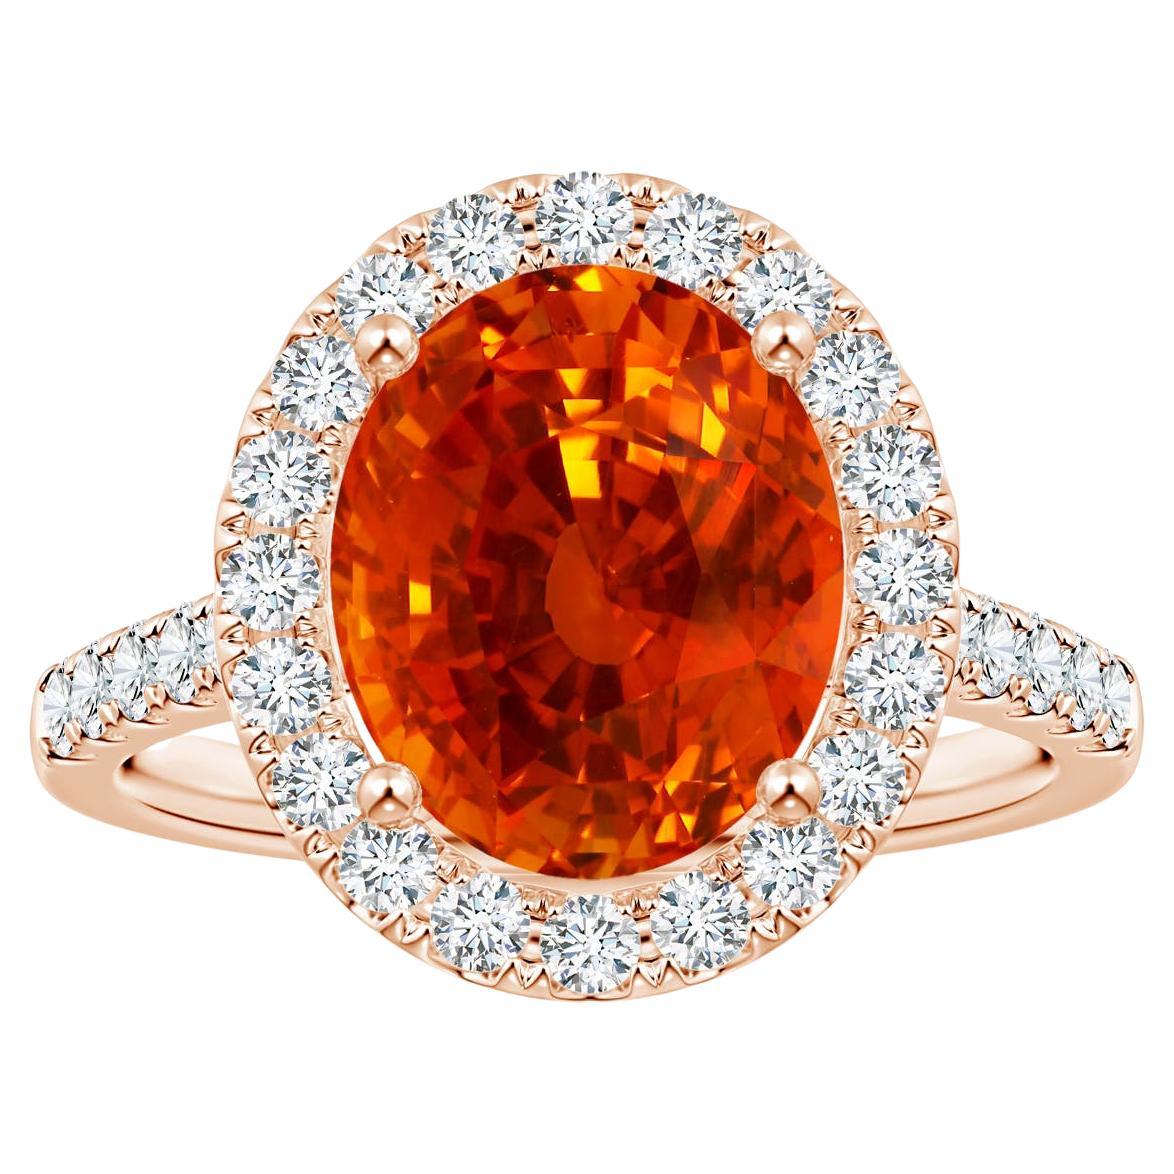 For Sale:  Angara Gia Certified Natural Orange Sapphire Diamond Halo Ring in Rose Gold